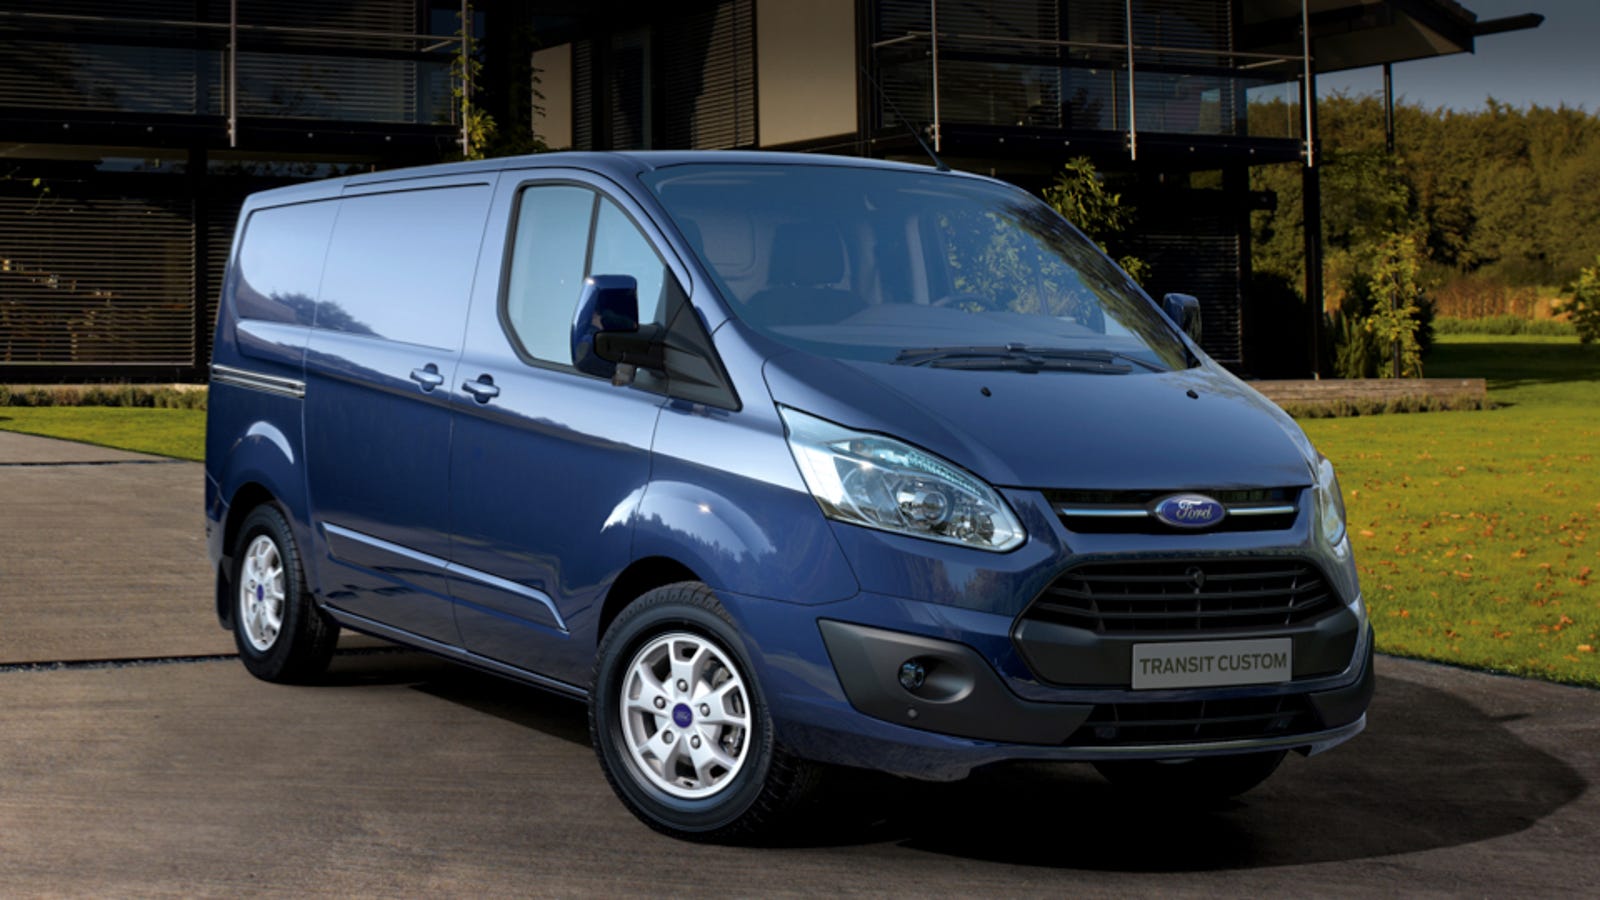 Ford's New European Transit Van That We Should Have Here